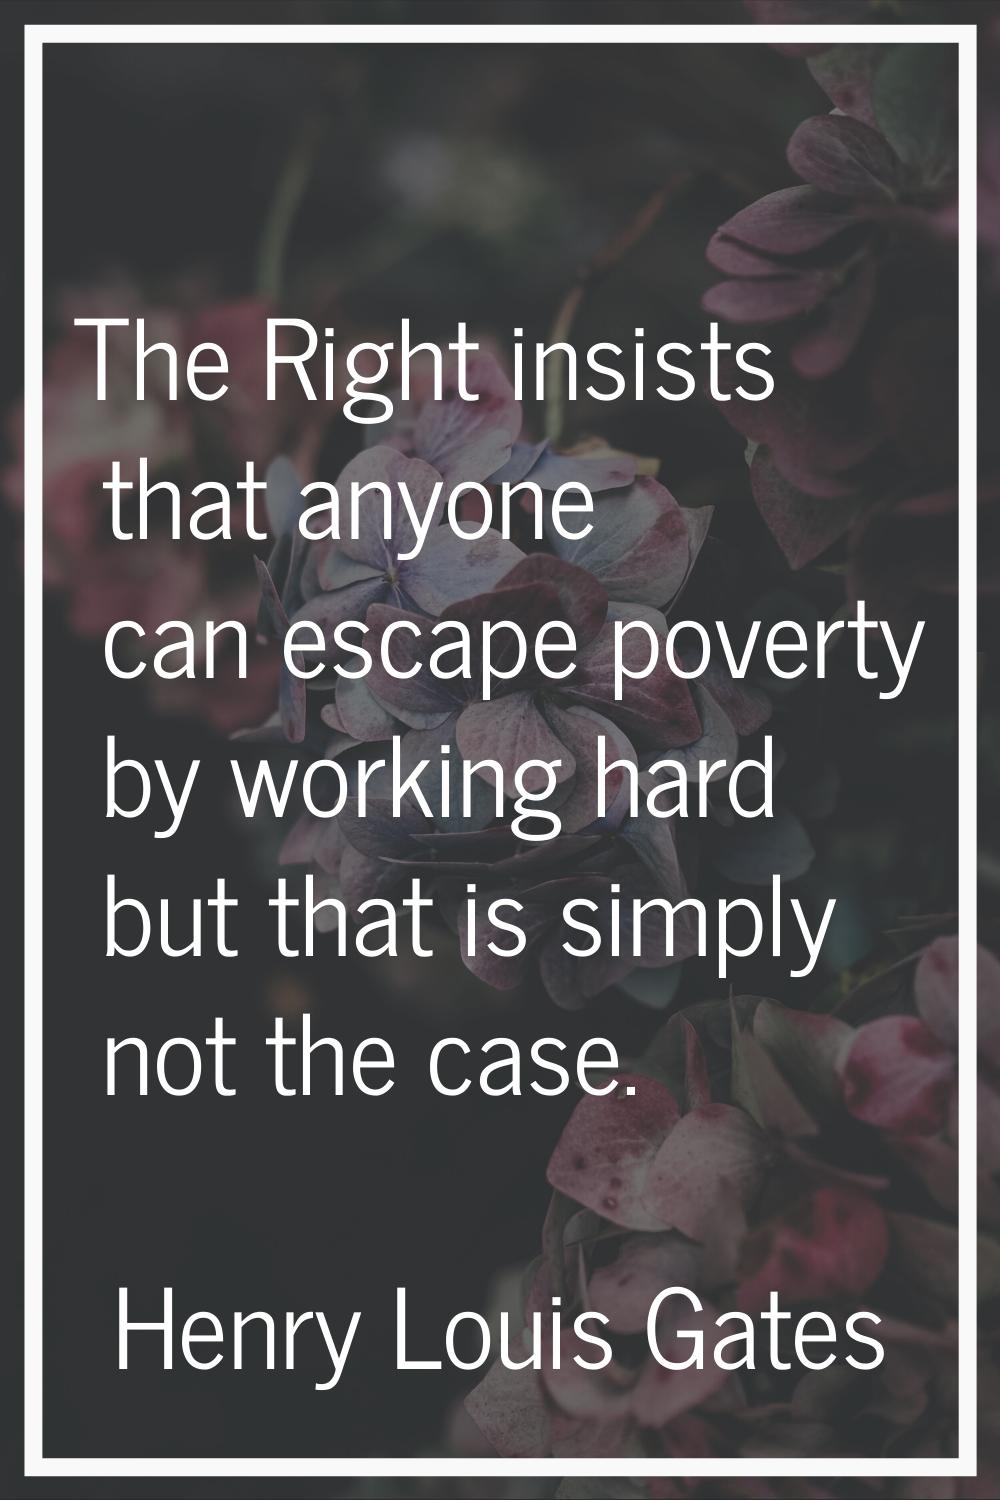 The Right insists that anyone can escape poverty by working hard but that is simply not the case.